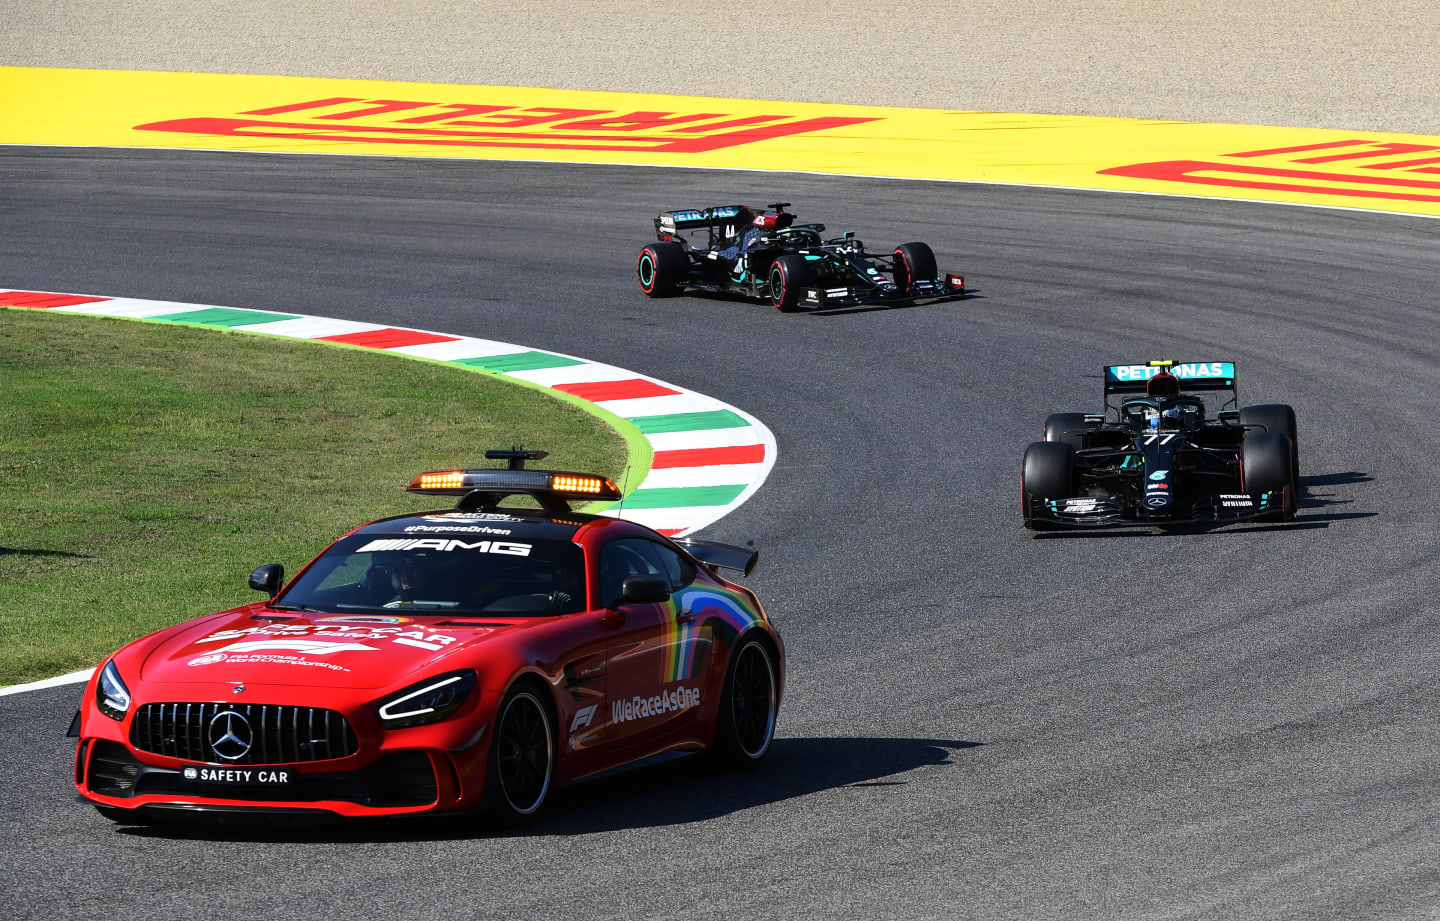 SCARPERIA, ITALY - SEPTEMBER 13: An FIA safety car leads Valtteri Bottas of Finland driving the